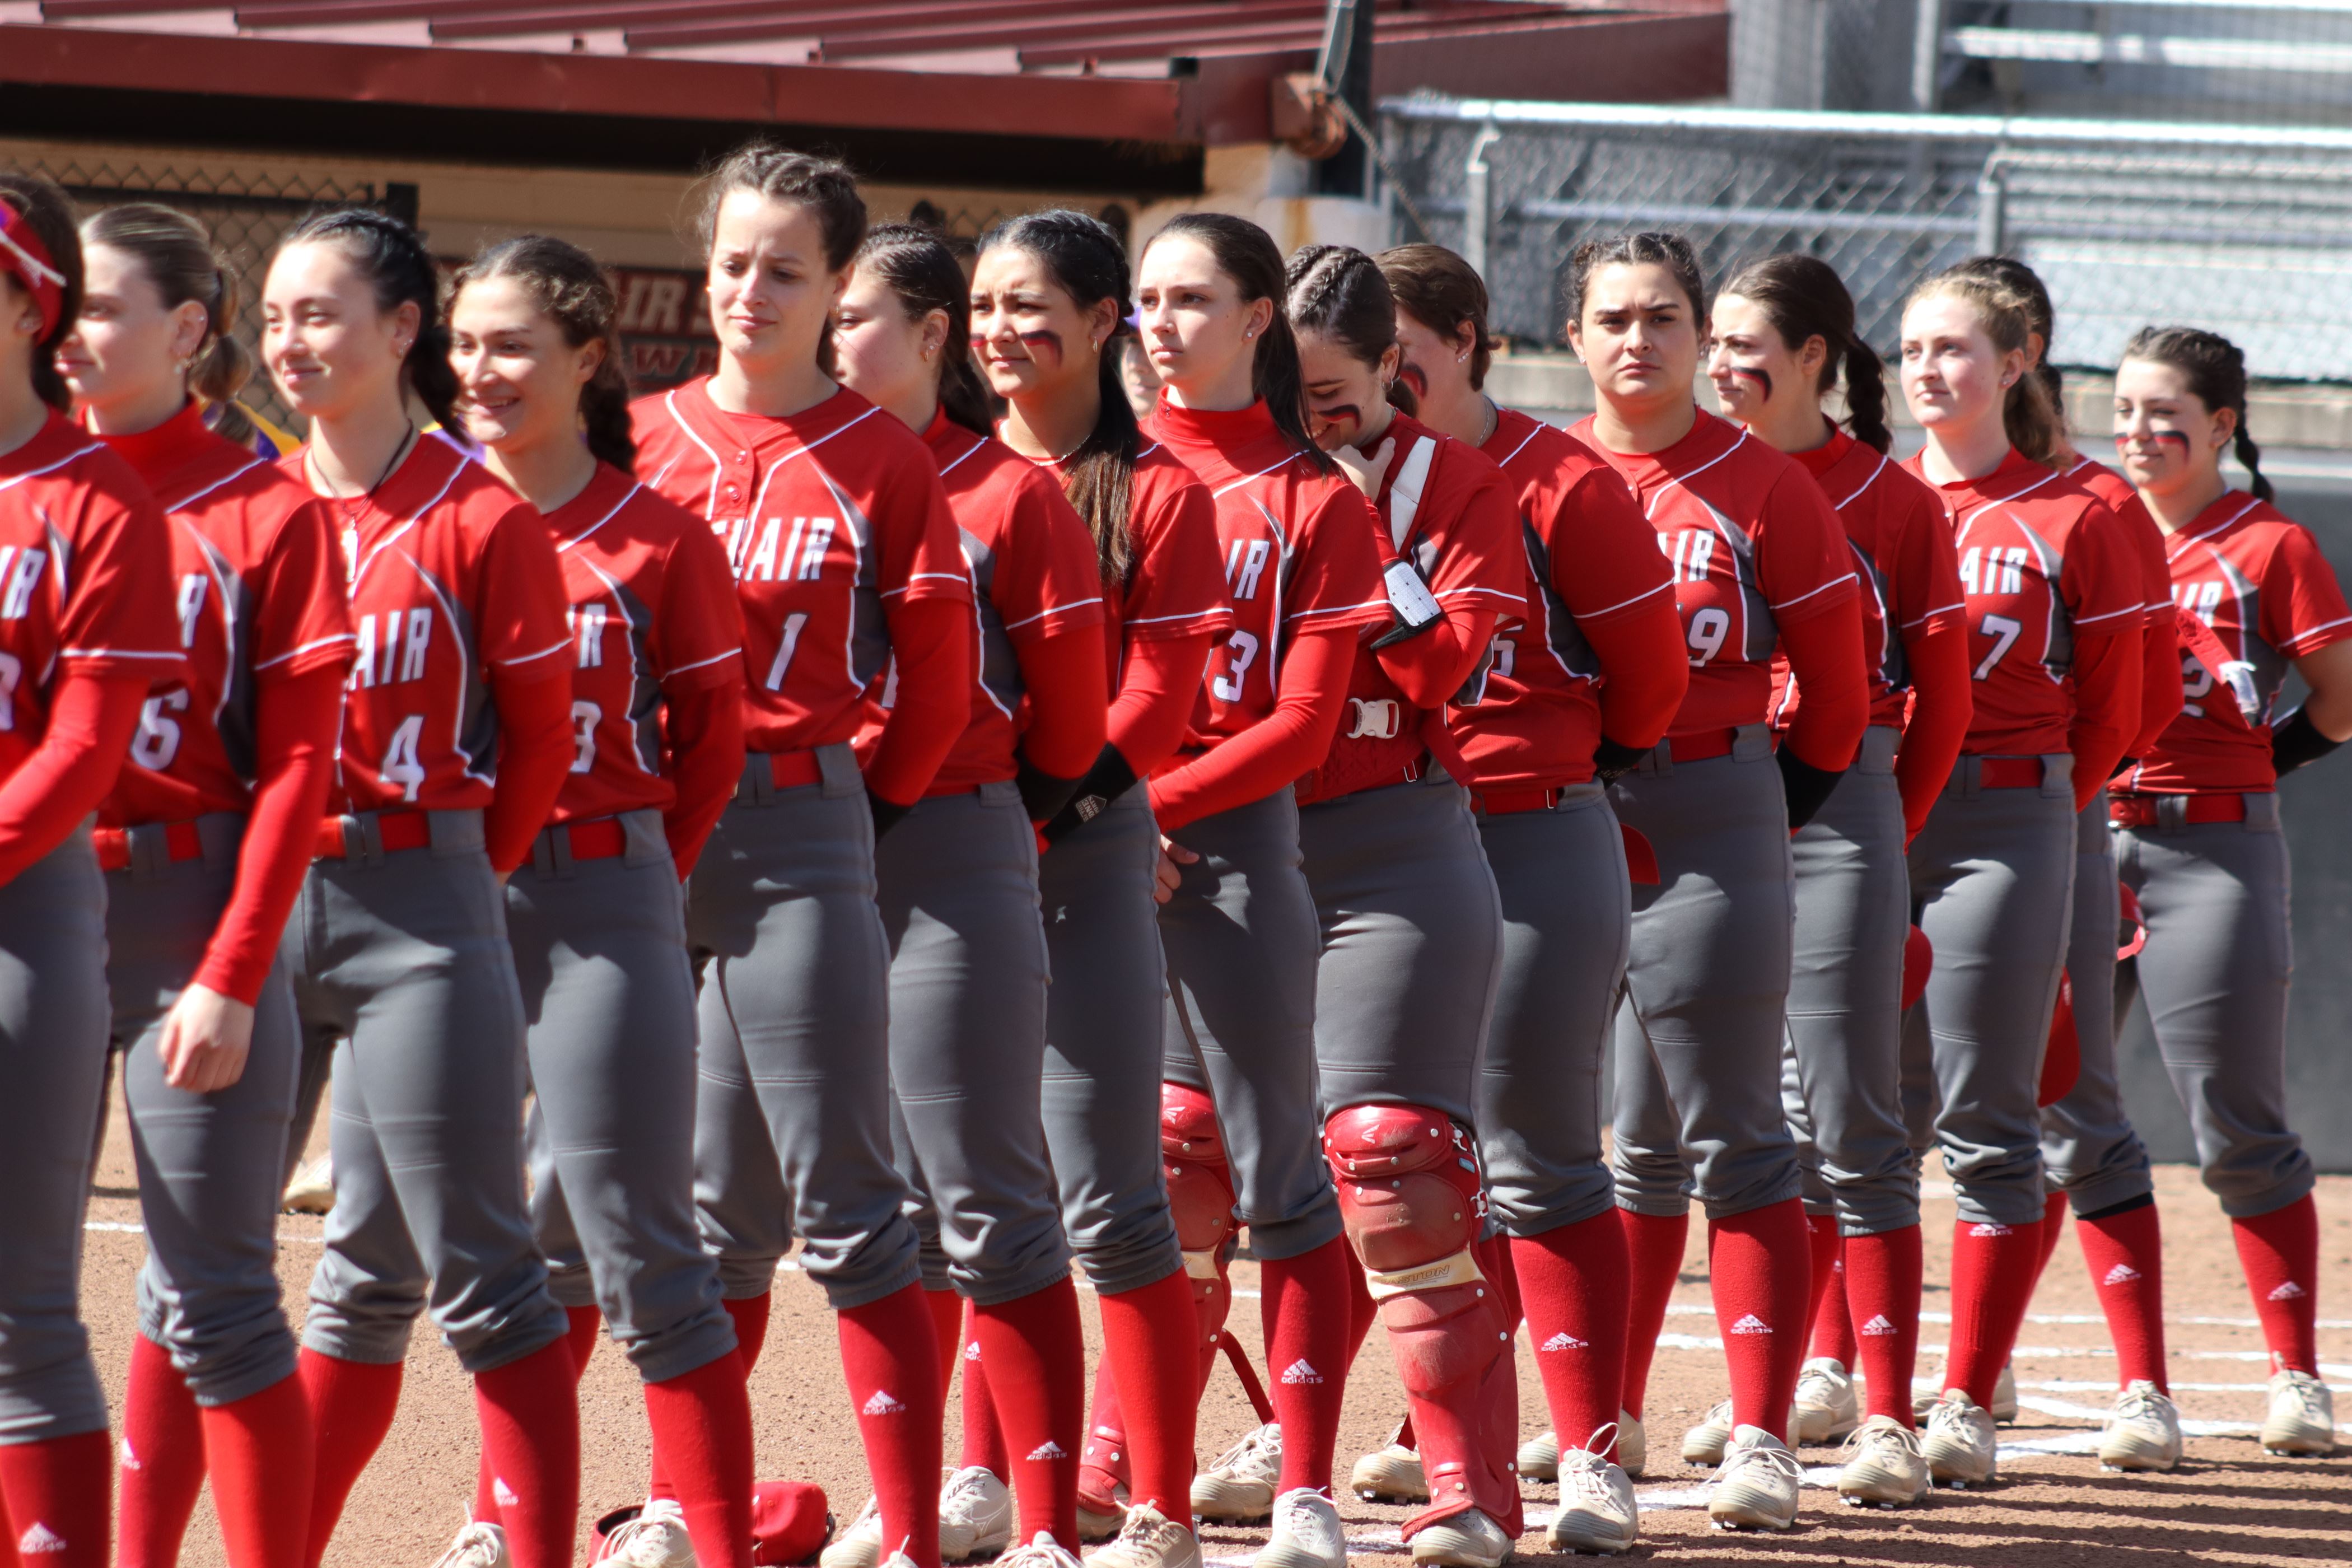 The Montclair State softball team stands for the national anthem before the game. Trevor Giesberg | The Montclarion